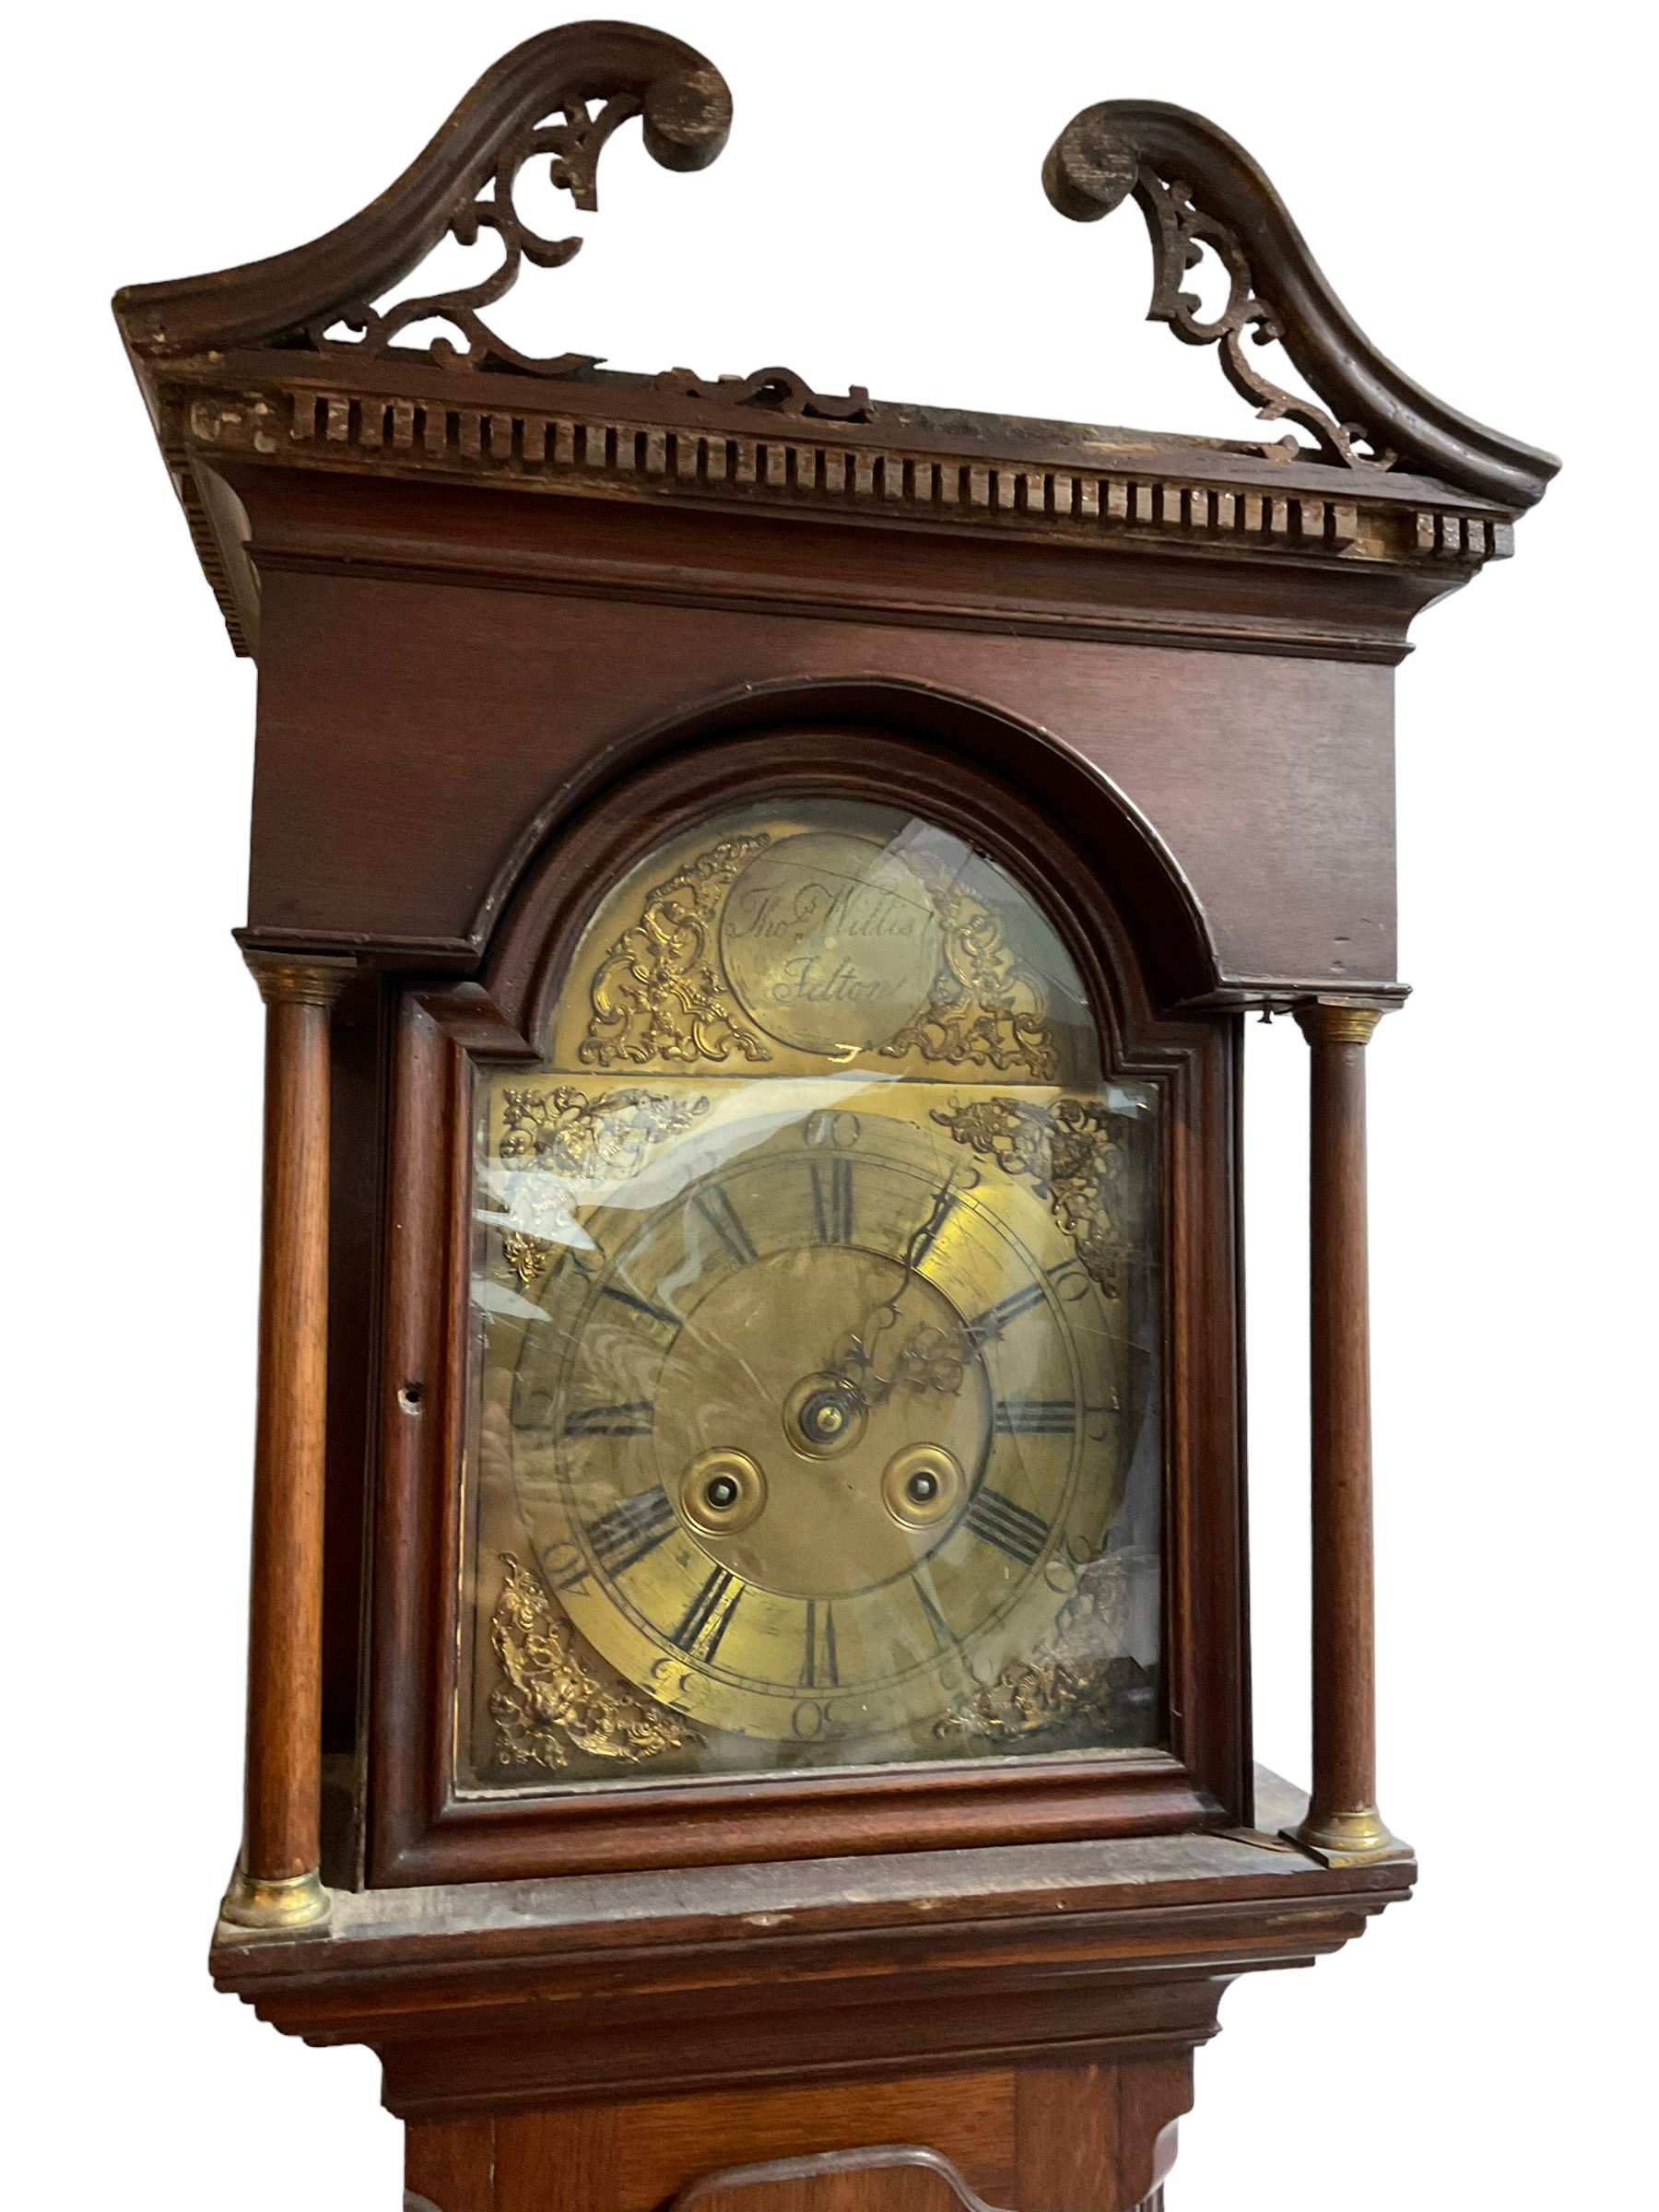 Unusual and rare 18th century key-wound two train 30-hour mahogany longcase clock - with a swans nec - Image 4 of 8